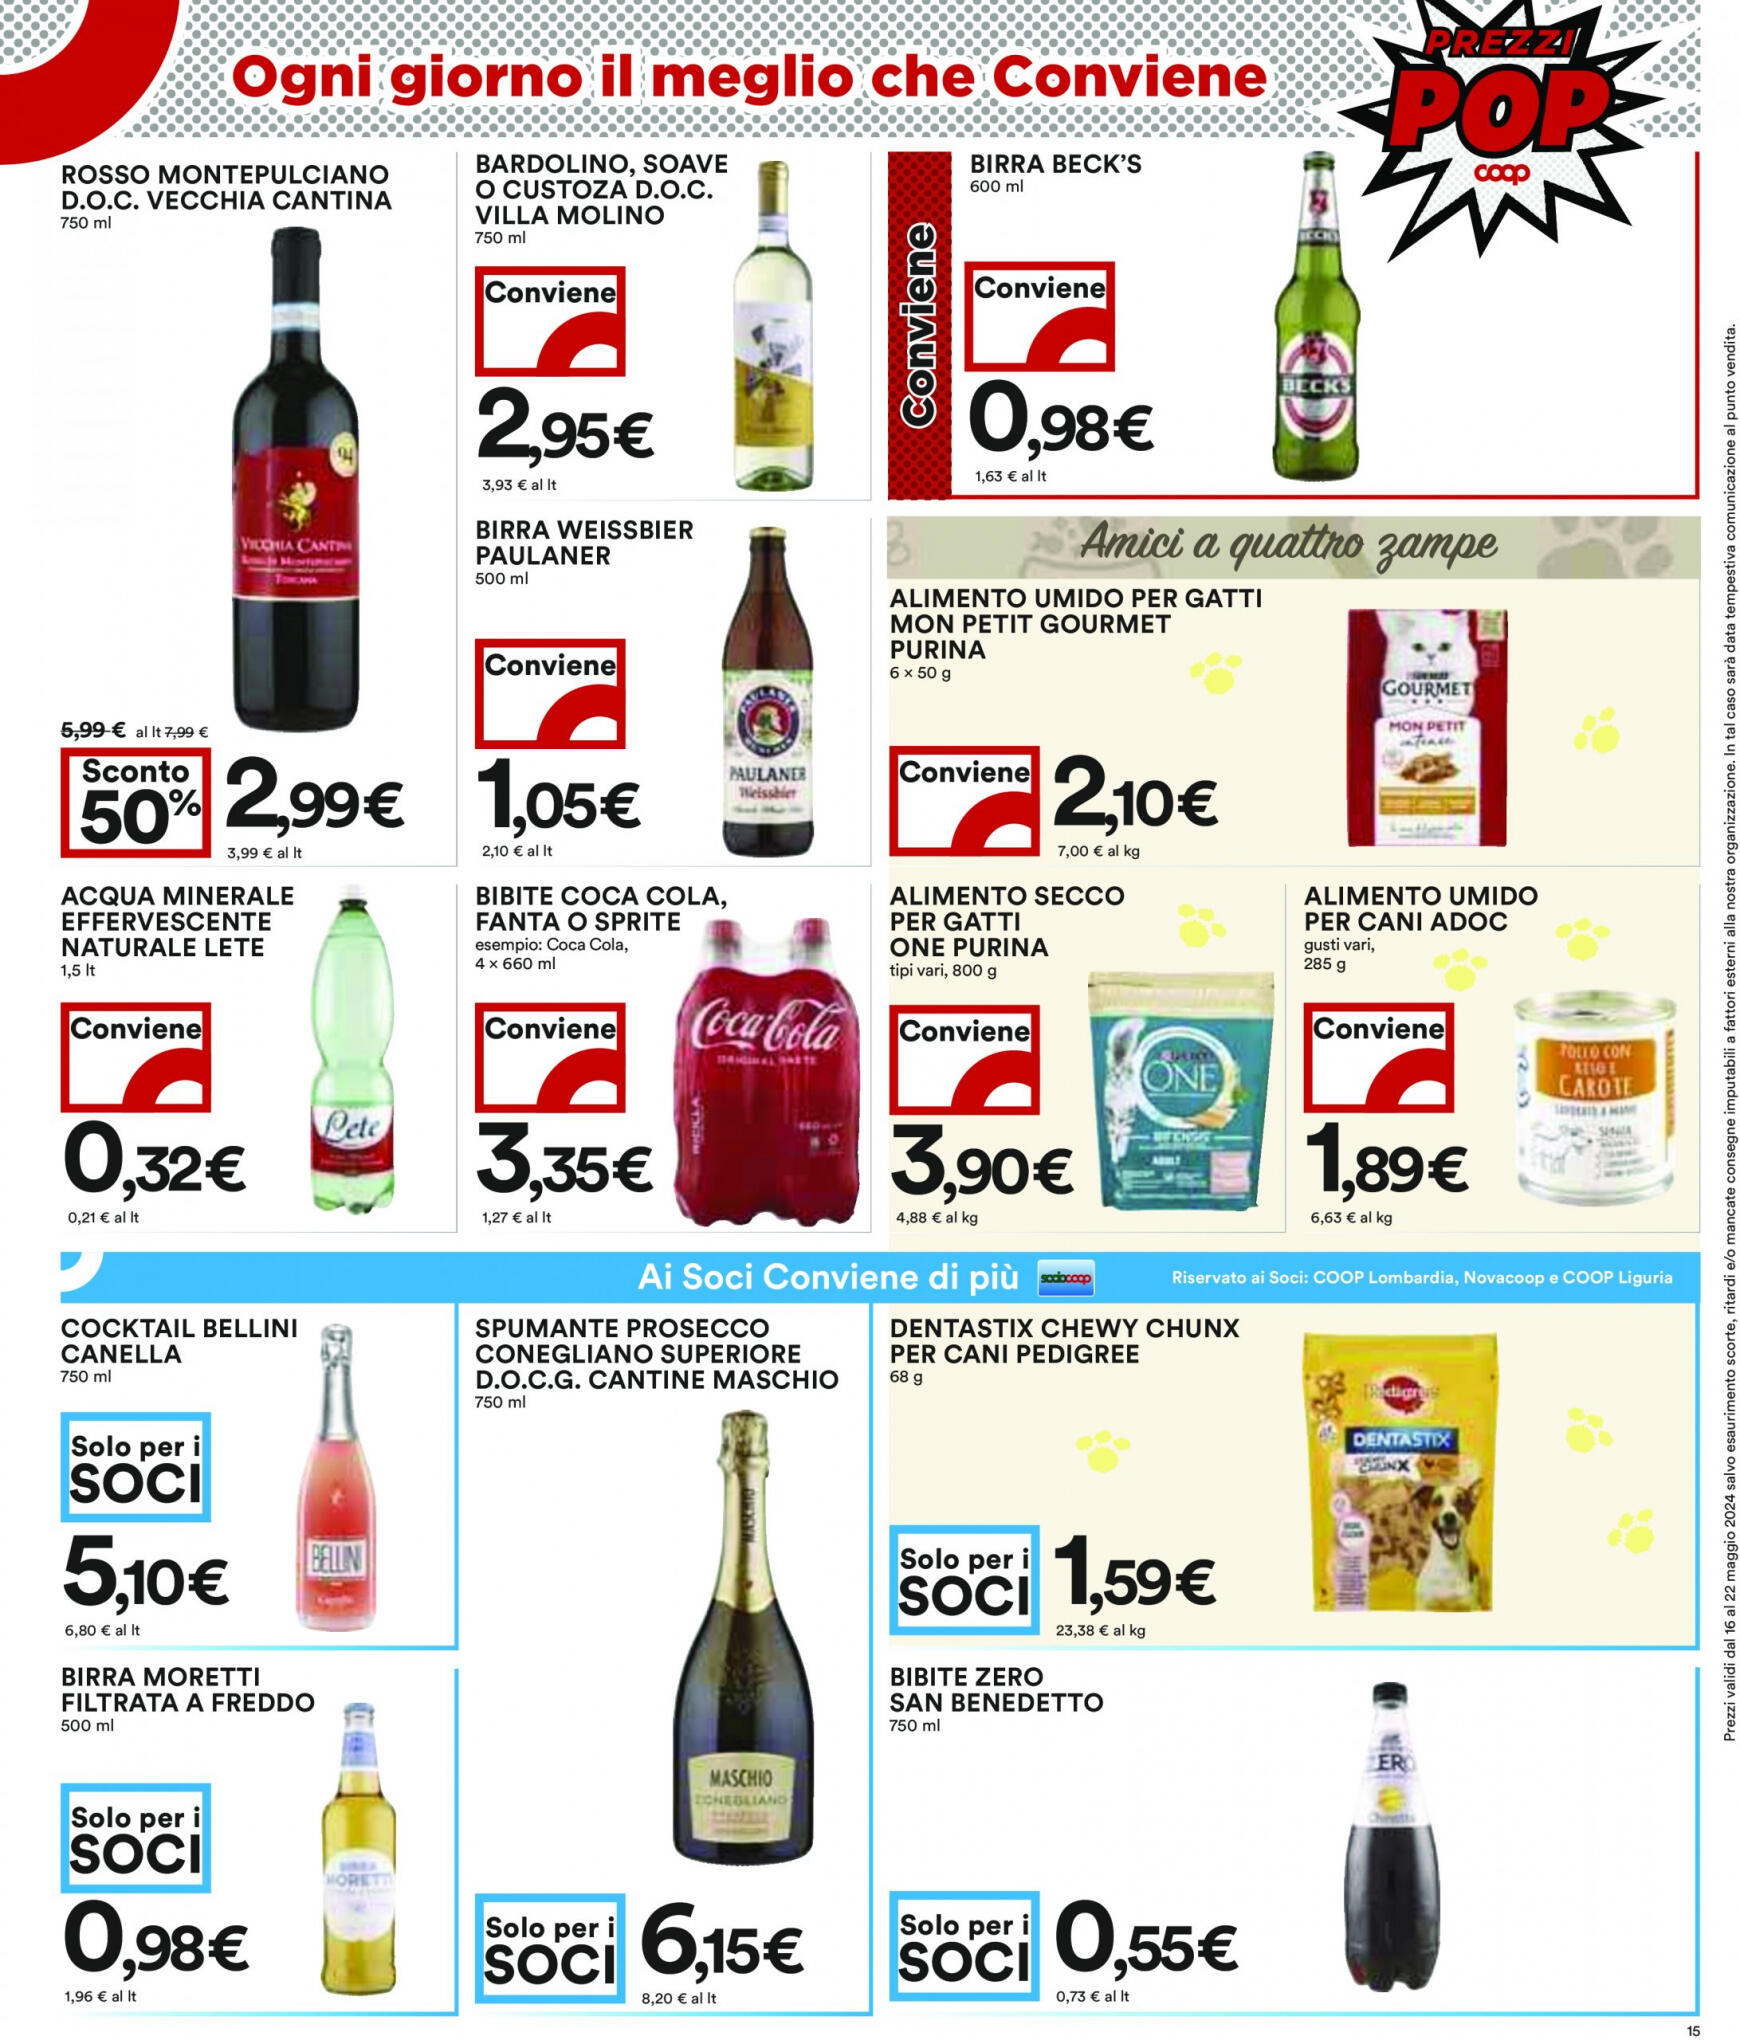 coop - Nuovo volantino Coop 16.05. - 22.05. - page: 15